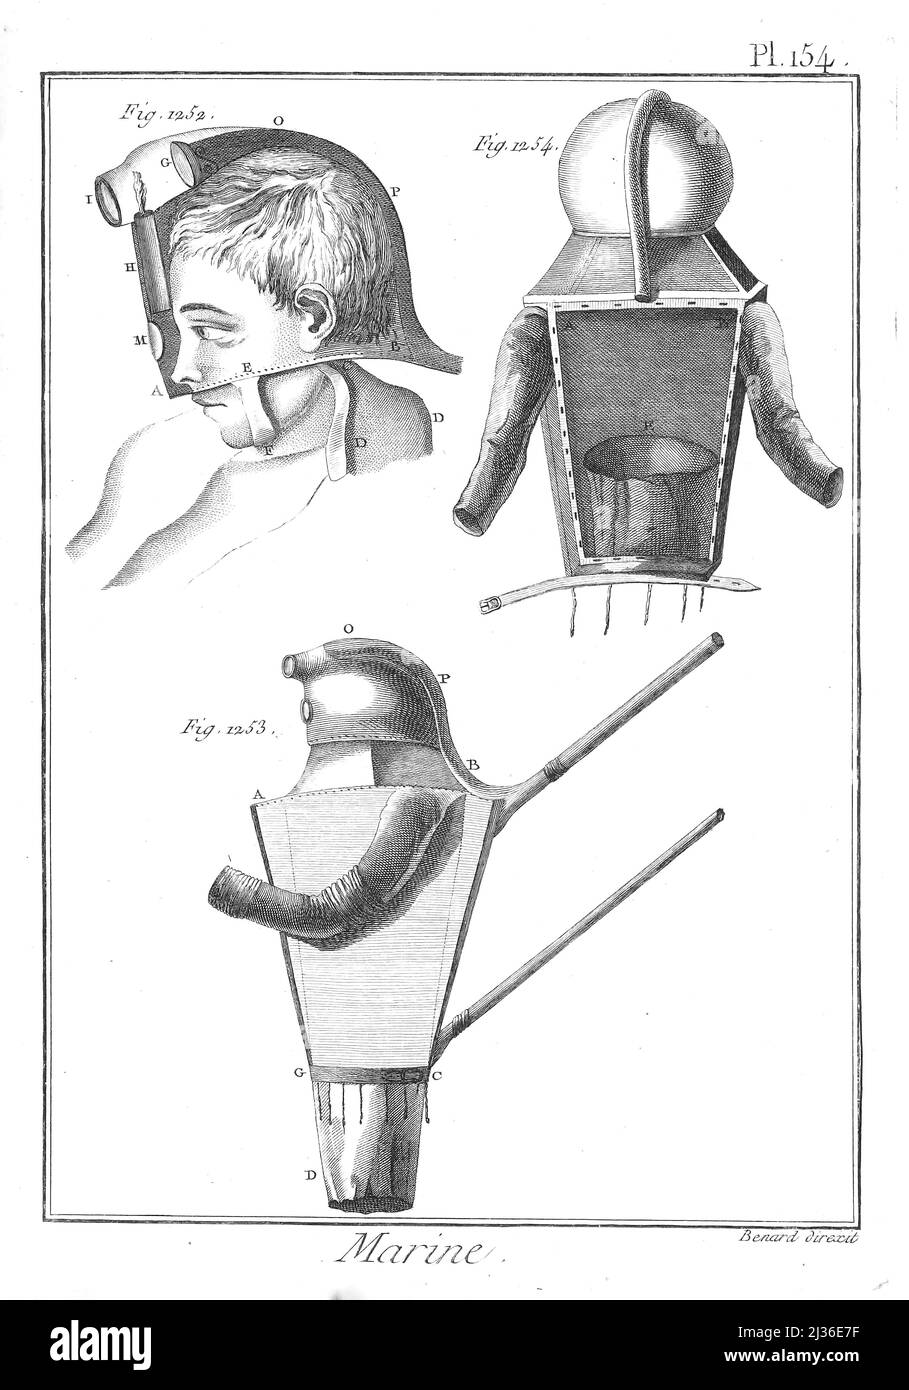 18th century Underwater diving suit From the Encyclopédie méthodique Maritime Encyclopedia Publisher Paris : Panckoucke ; Liège : Plomteux in 1787 containing drawings and blueprints of shipbuilding,  and Illustrations of maritime subjects plates drawn by Benard direxit Stock Photo